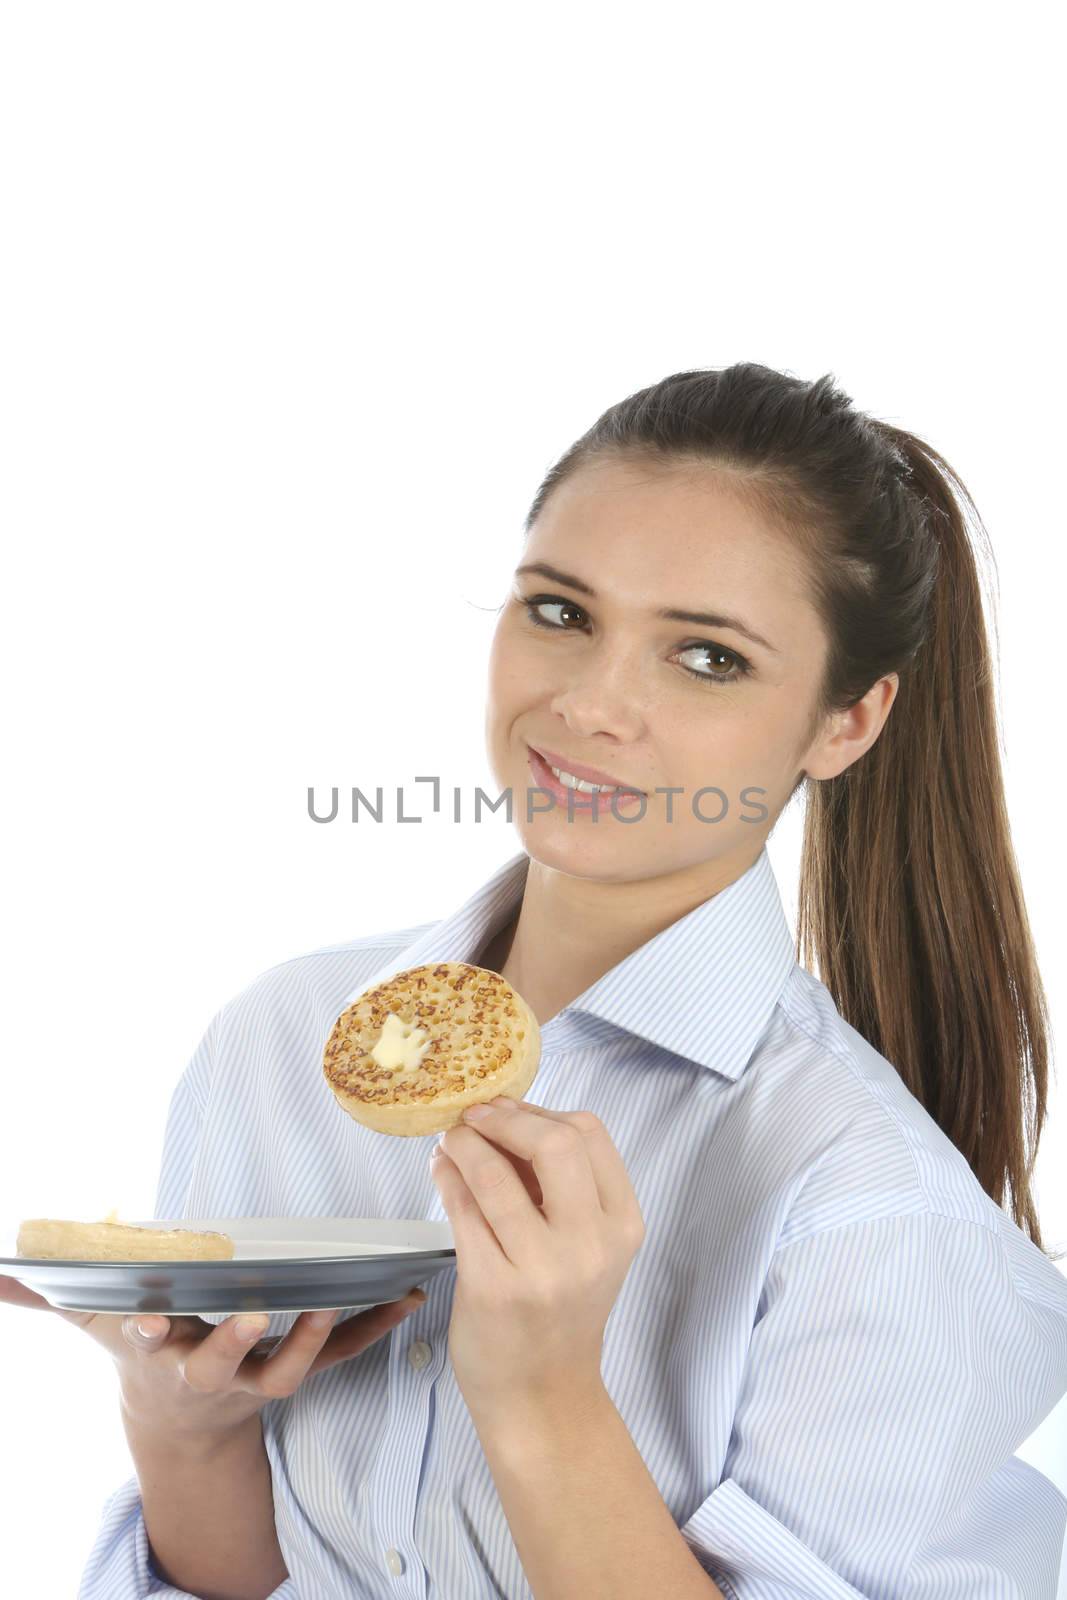 Woman Eating Toasted Crumpet